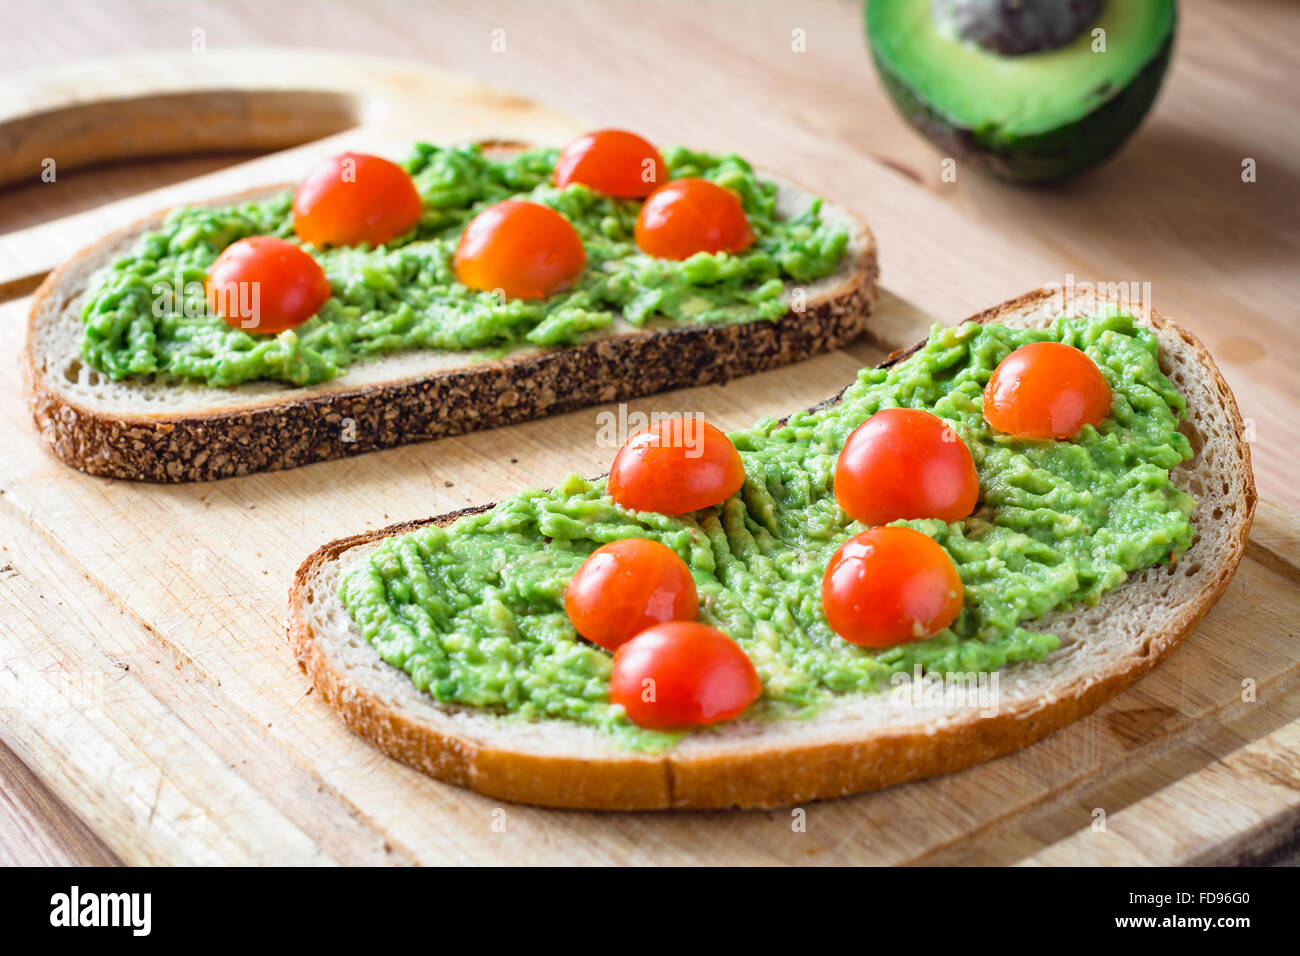 Guacamole and bread. Toast with avocado and cherry tomatoes on wooden cutting board Stock Photo